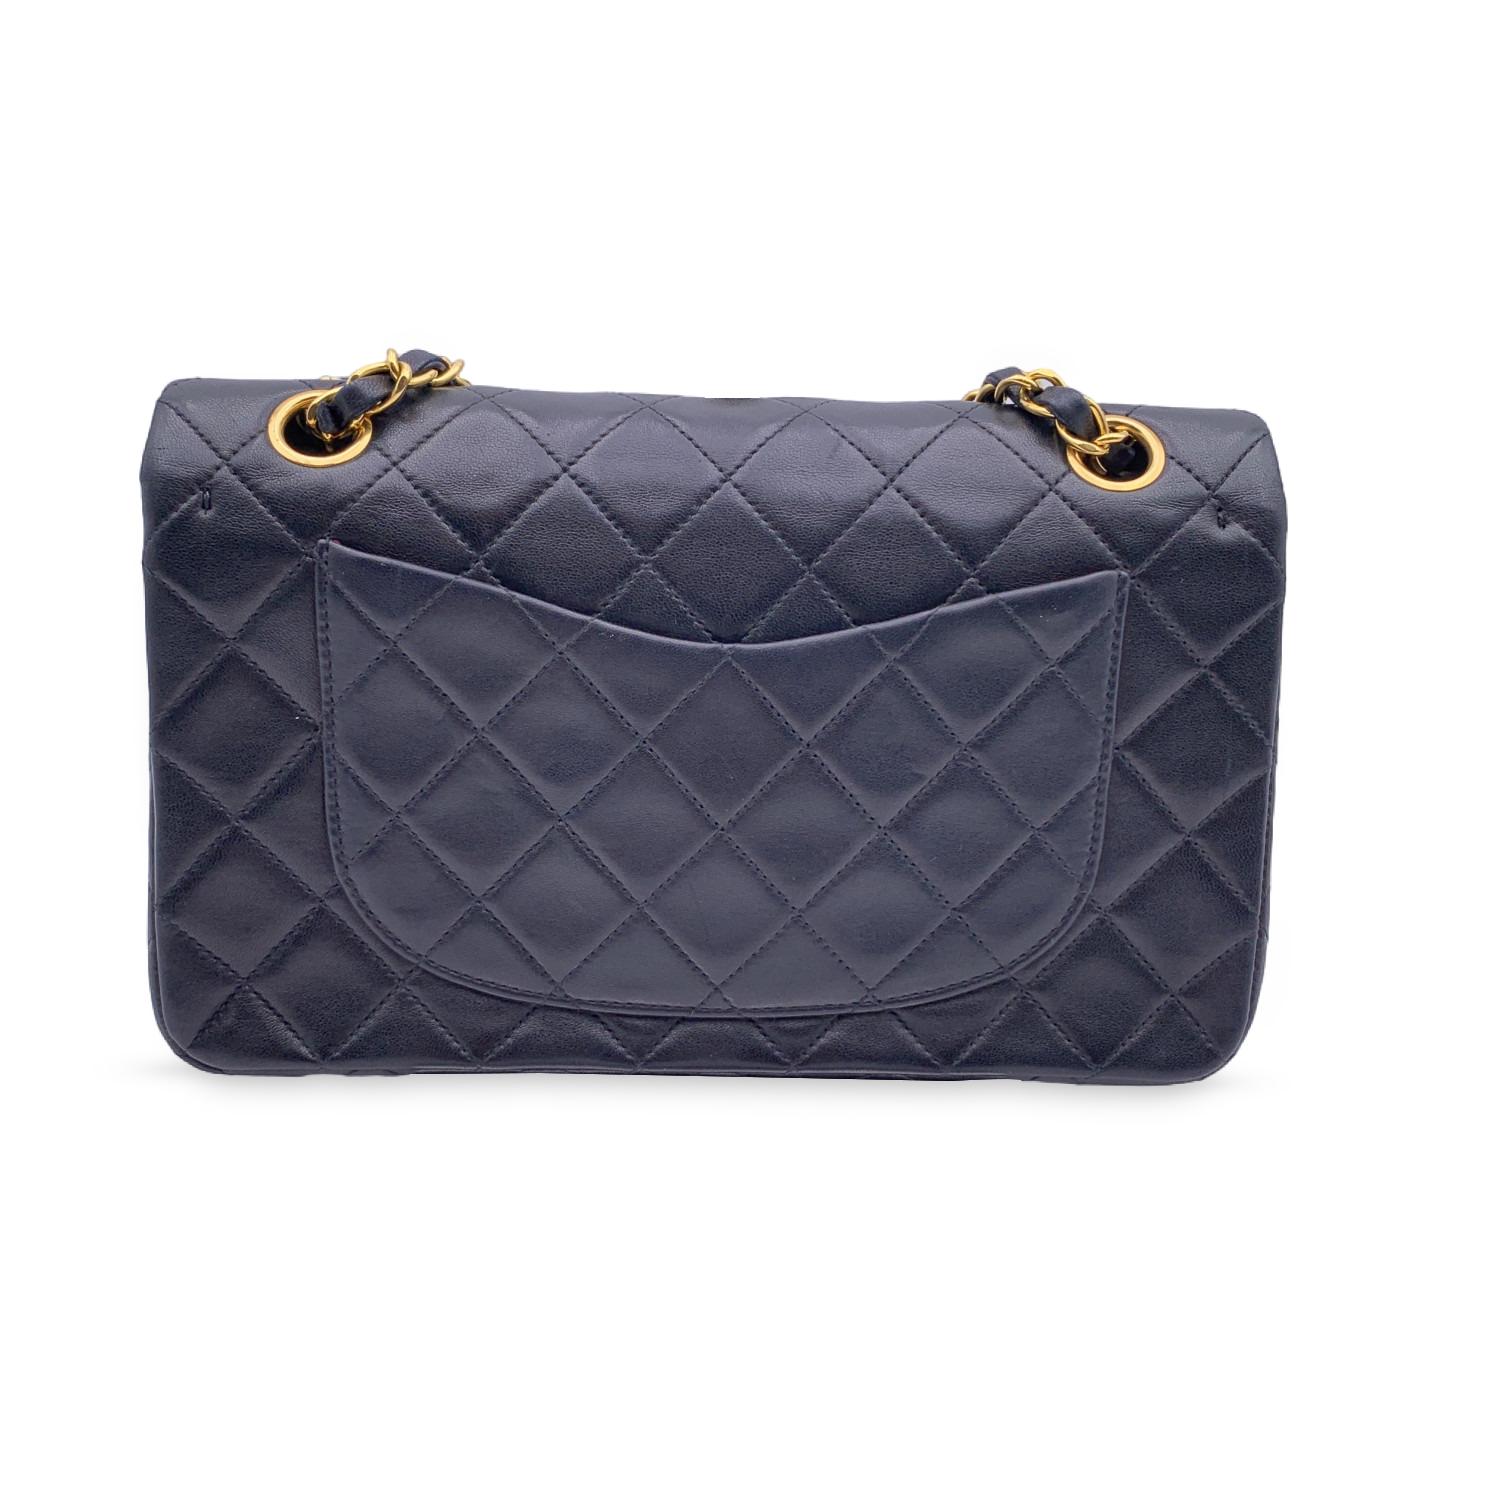 Chanel Vintage Black Quilted Timeless Classic Small 2.55 Bag 23 cm In Excellent Condition For Sale In Rome, Rome